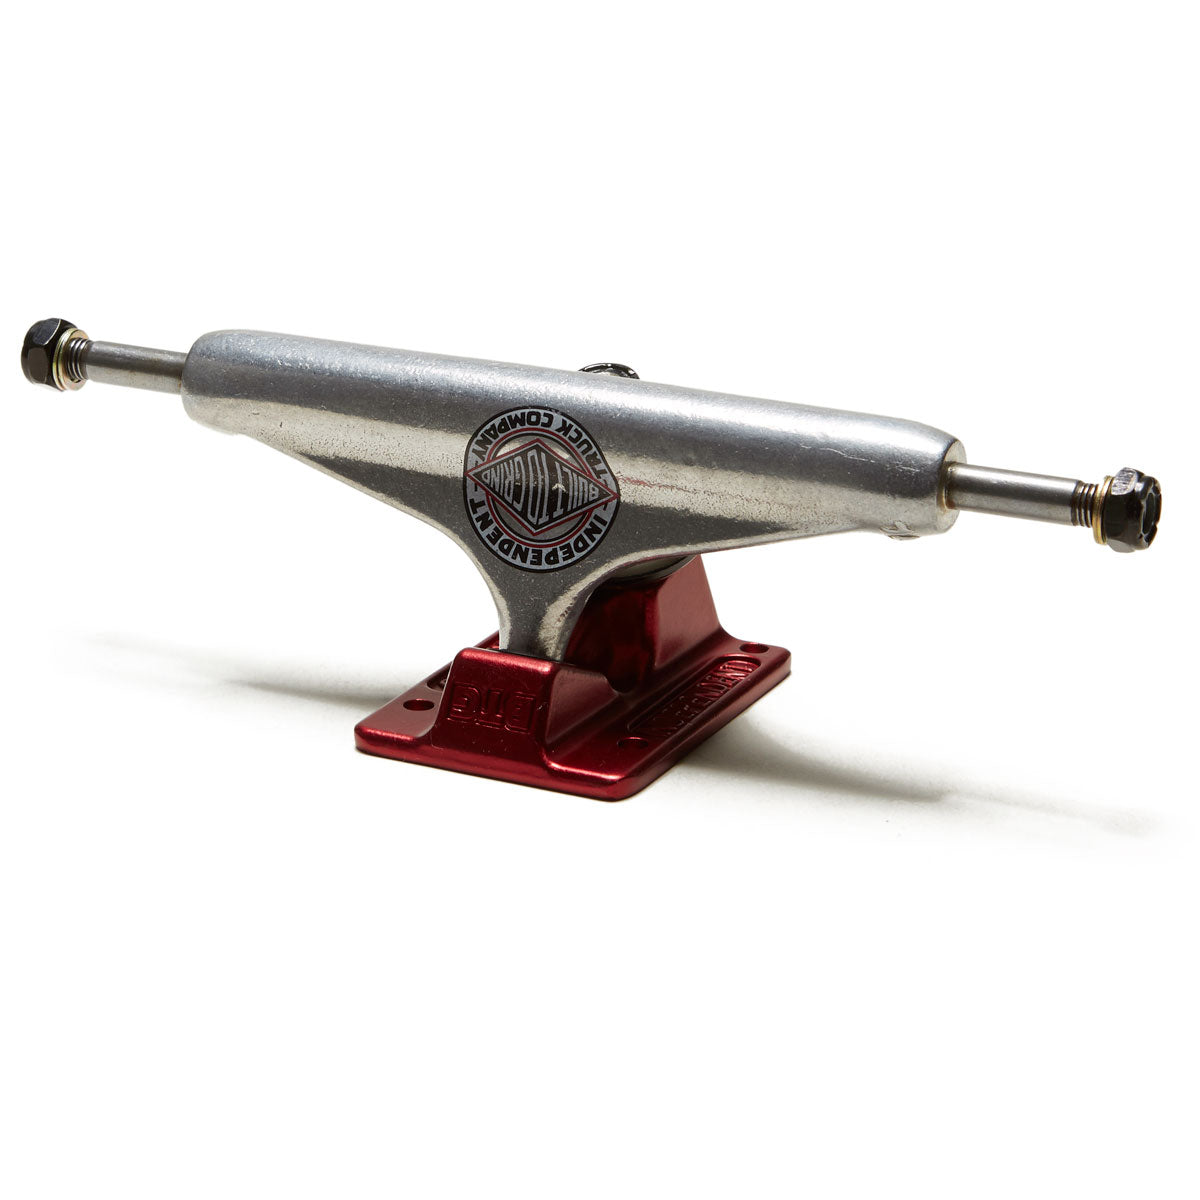 Independent Stage 11 Forged Hollow BTG Summit Standard Skateboard Trucks - Silver/Ano Red - 159mm image 1